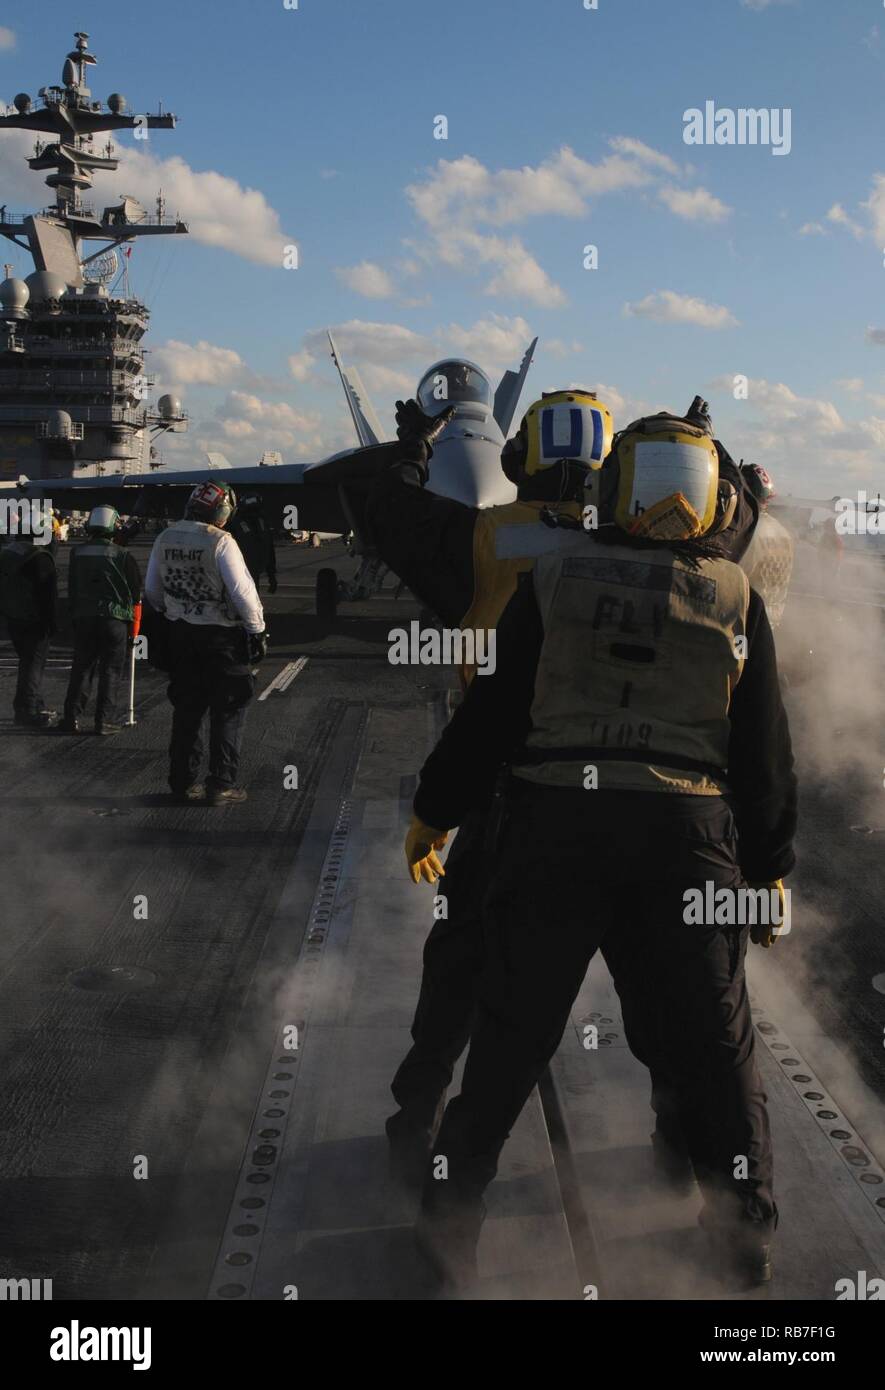 ATLANTIC OCEAN (Dec. 2, 2016) Sailors direct an F/A-18E Super Hornet towards the catapult for take off on the flight deck aboard the aircraft carrier USS George H.W. Bush (CVN 77). GHWB is underway conducting a Composite Training Unit Exercise (COMPTUEX) with the George H.W. Bush Carrier Strike Group in preparation for an upcoming deployment. Stock Photo